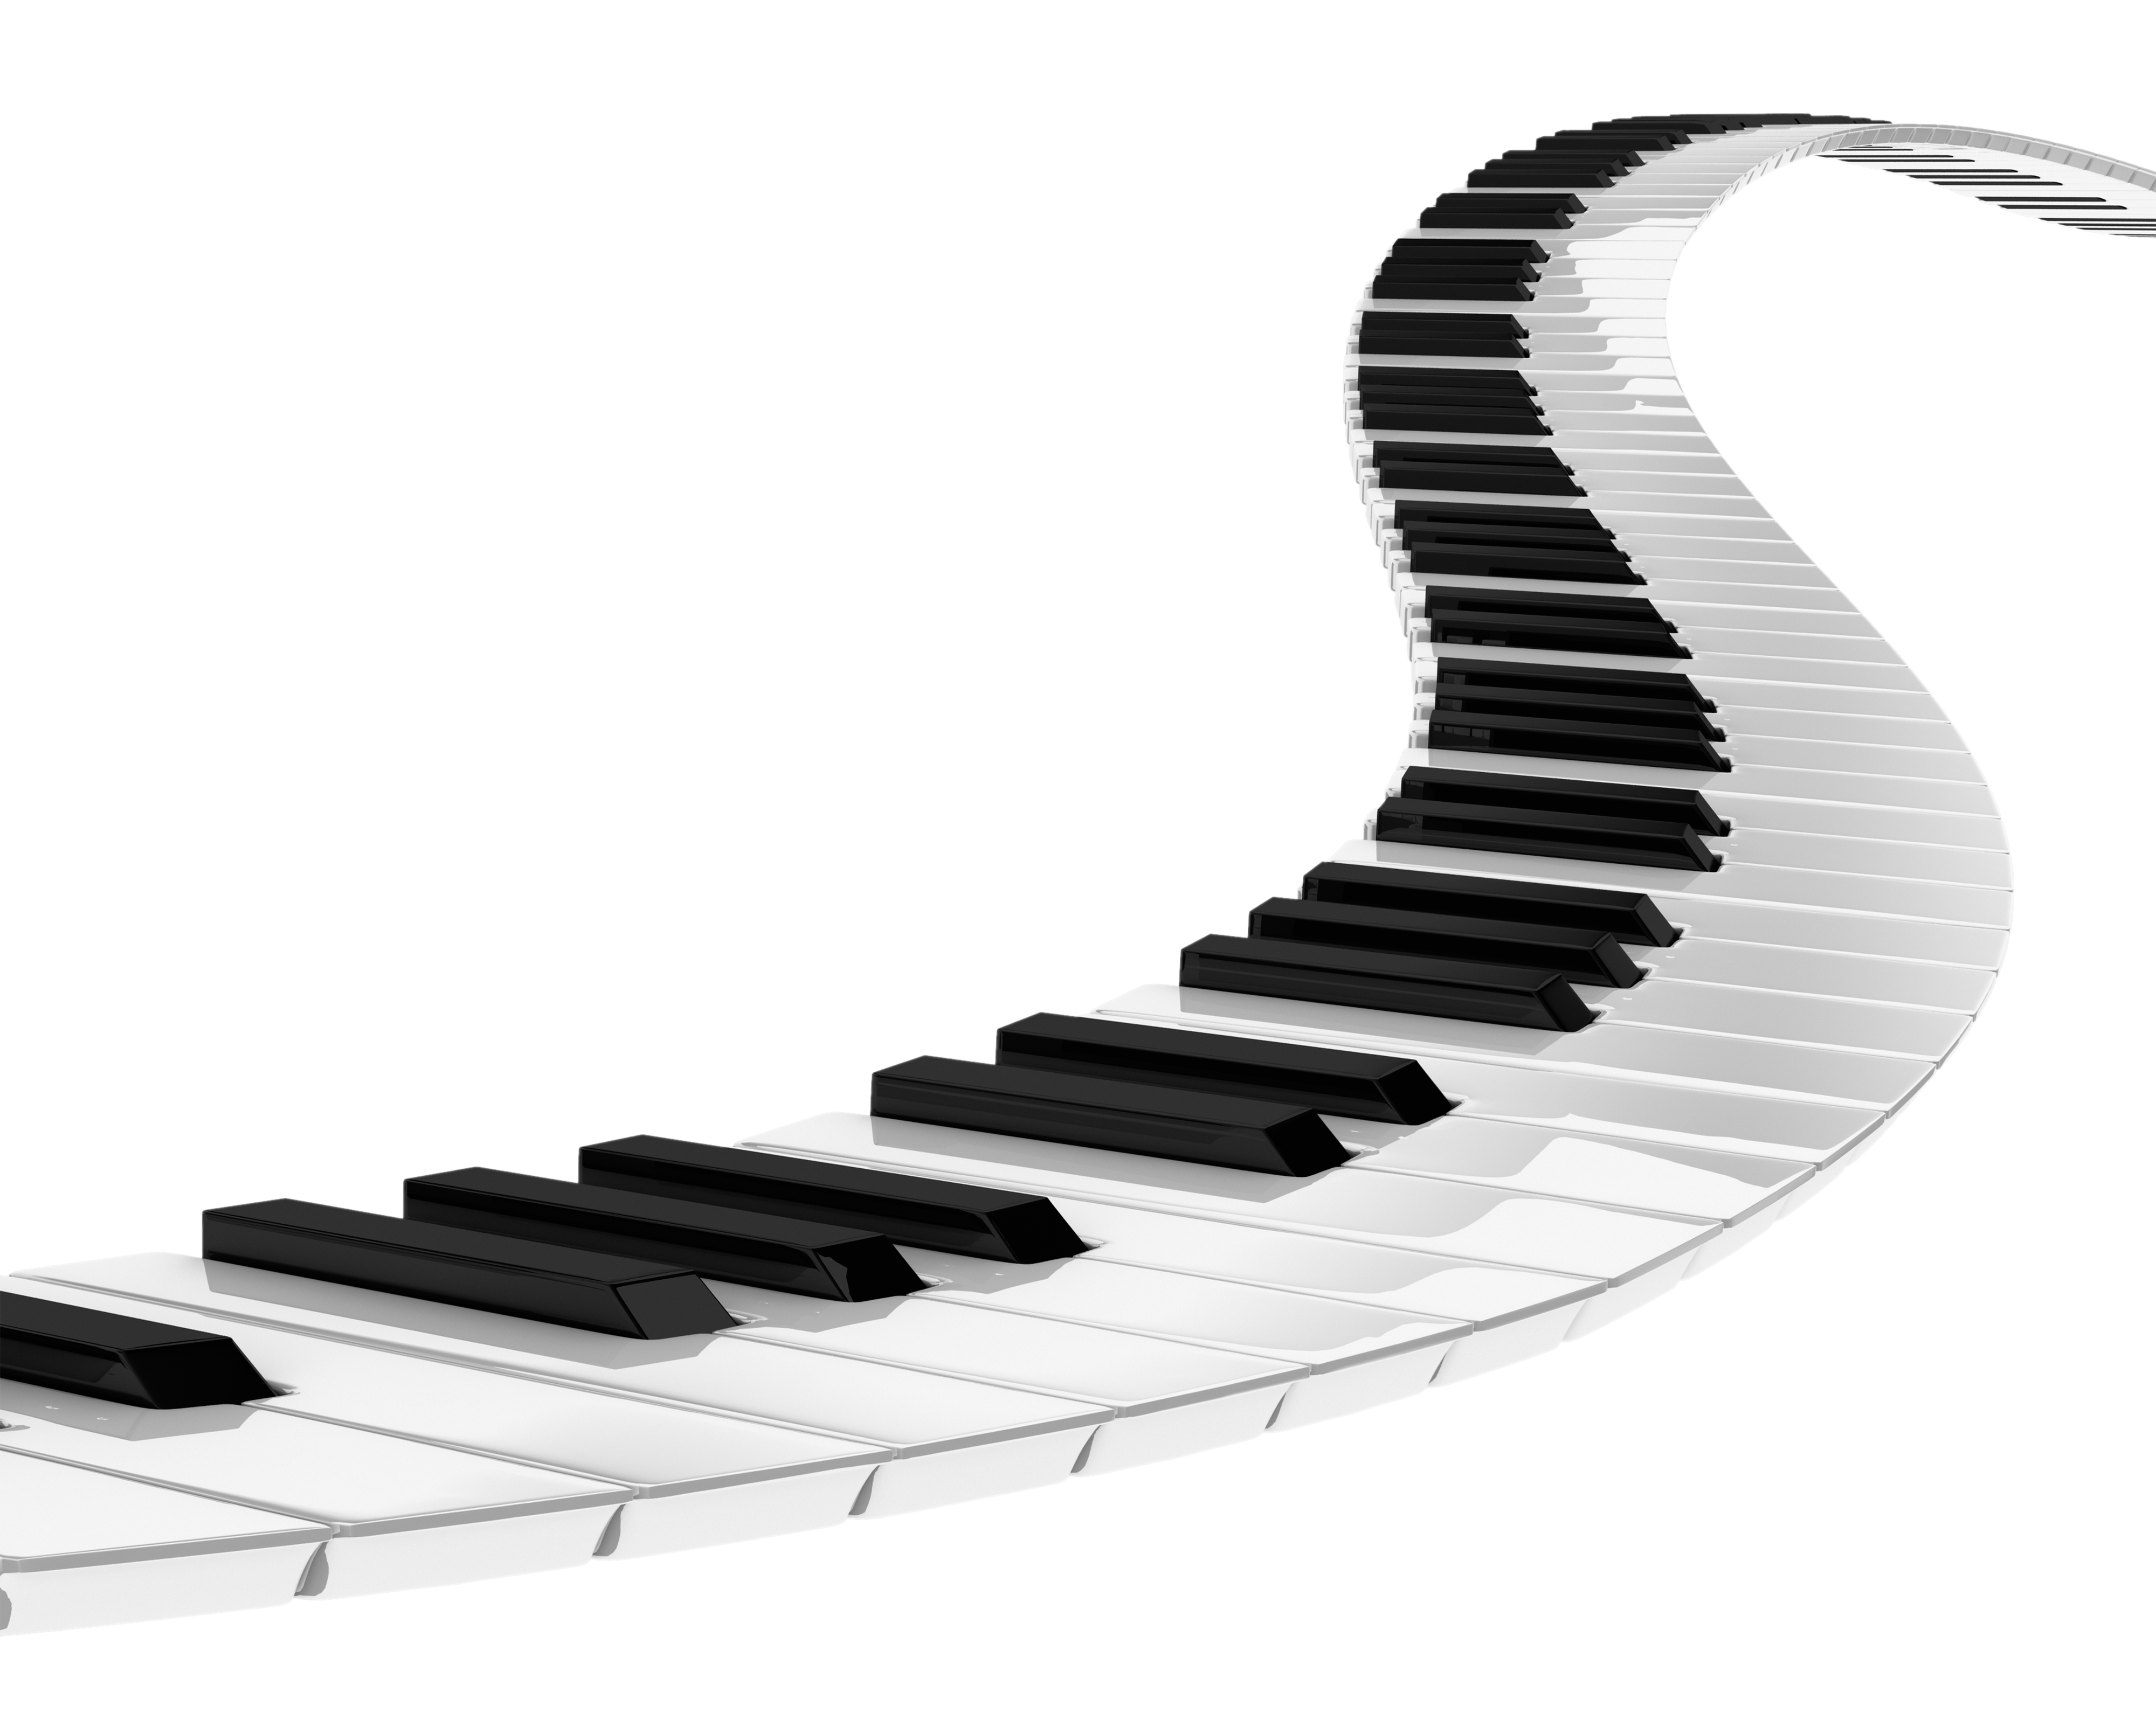 Ladder clipart number. Piano transparent png picture